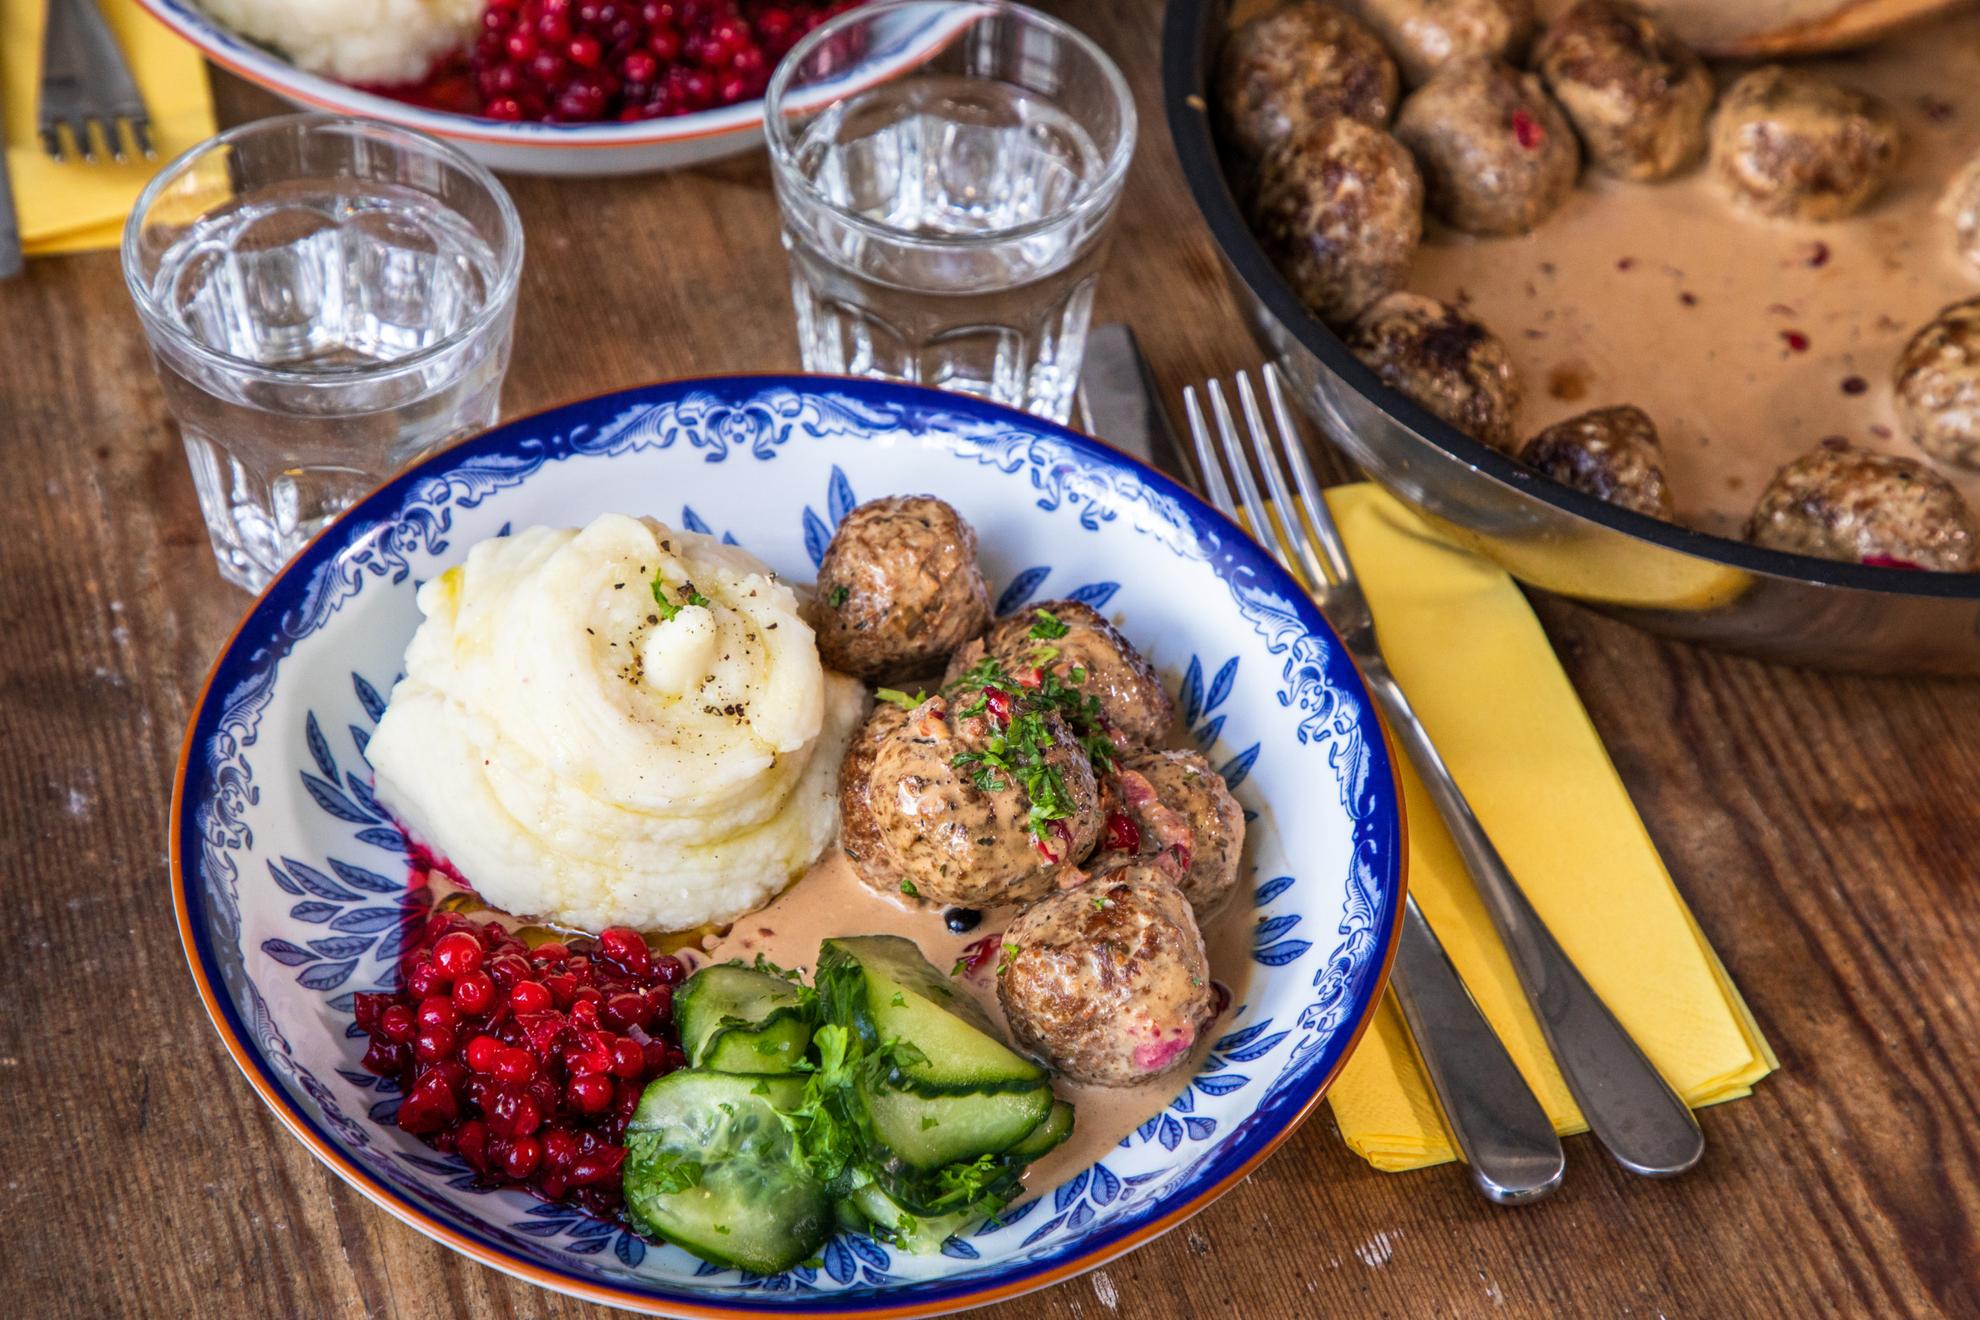 A plate with vegan meatballs, sauce, pickled cucumber, lingonberry jam and mashed potatoes.